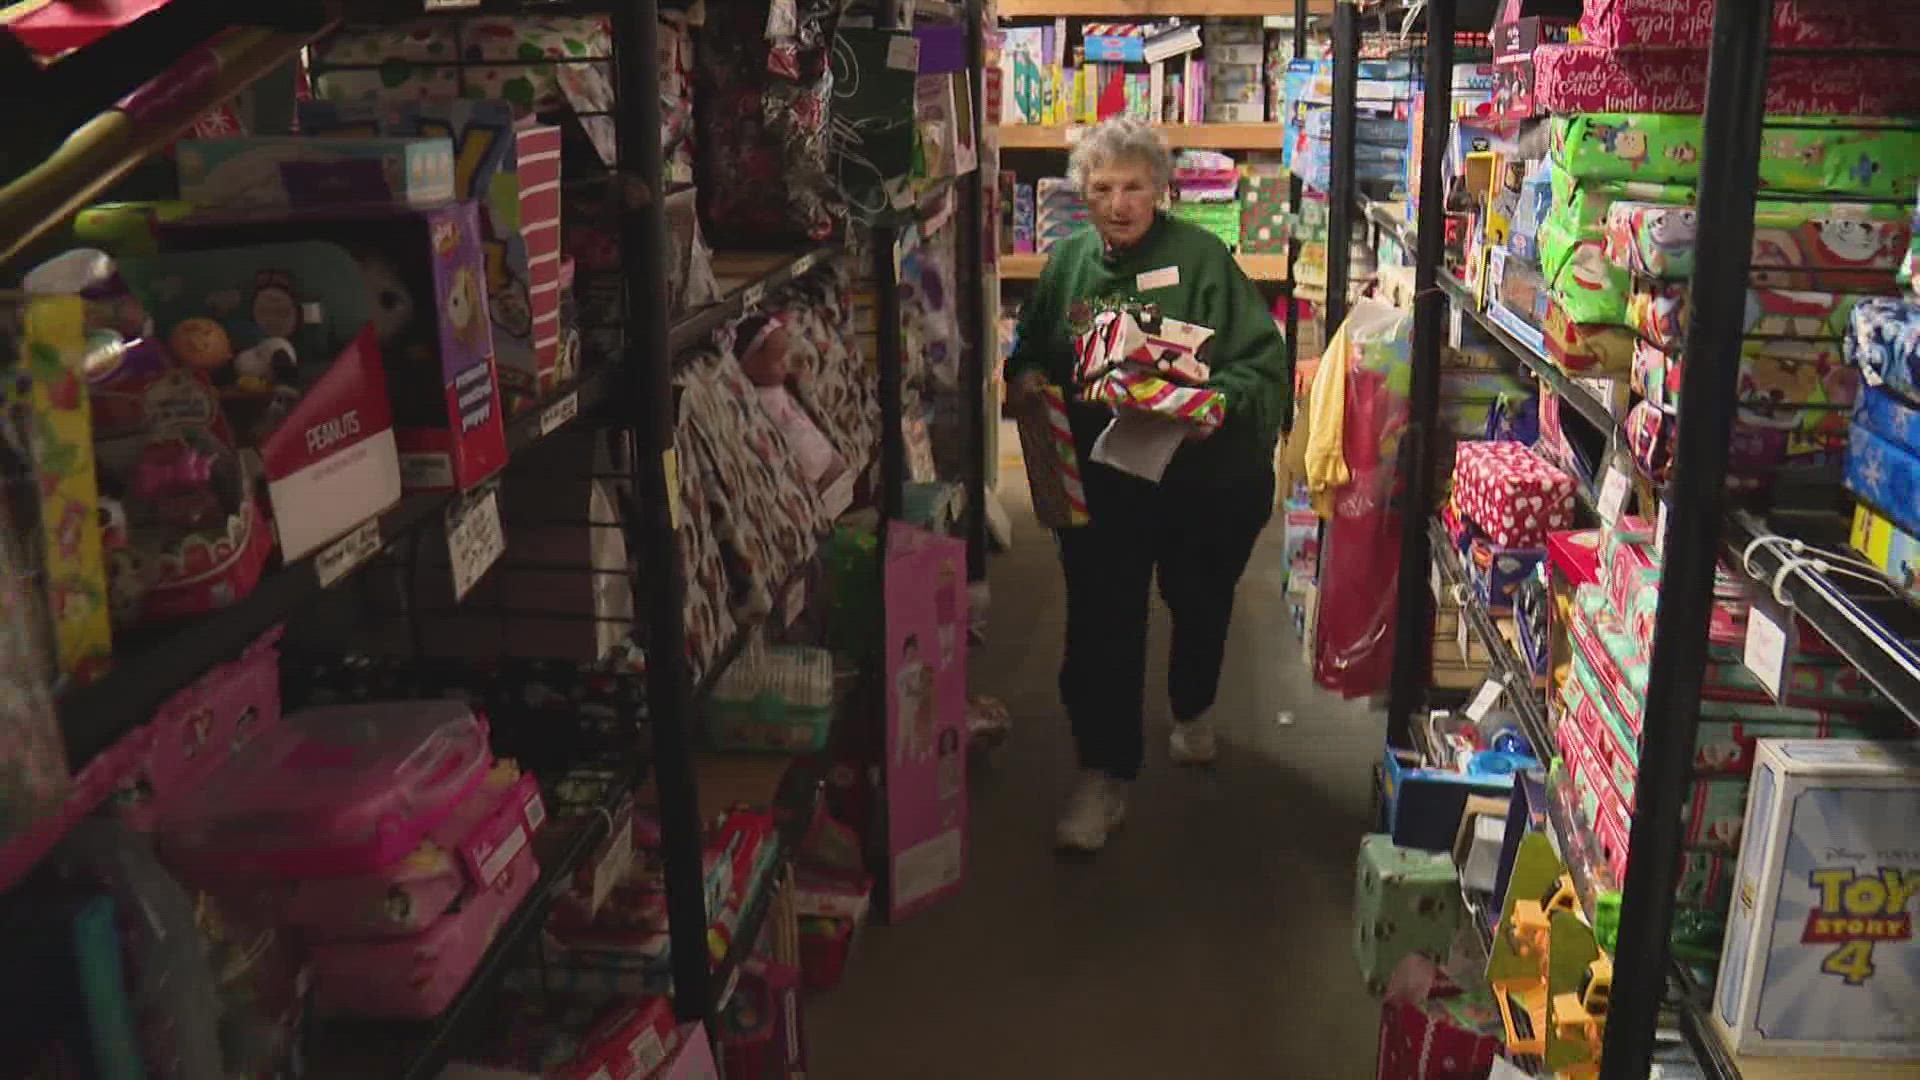 Started by Rita Swiener, Santa's Helpers has provided St. Louis-area families in need with holiday gifts. The nonprofit serves over 3,500 children each year.